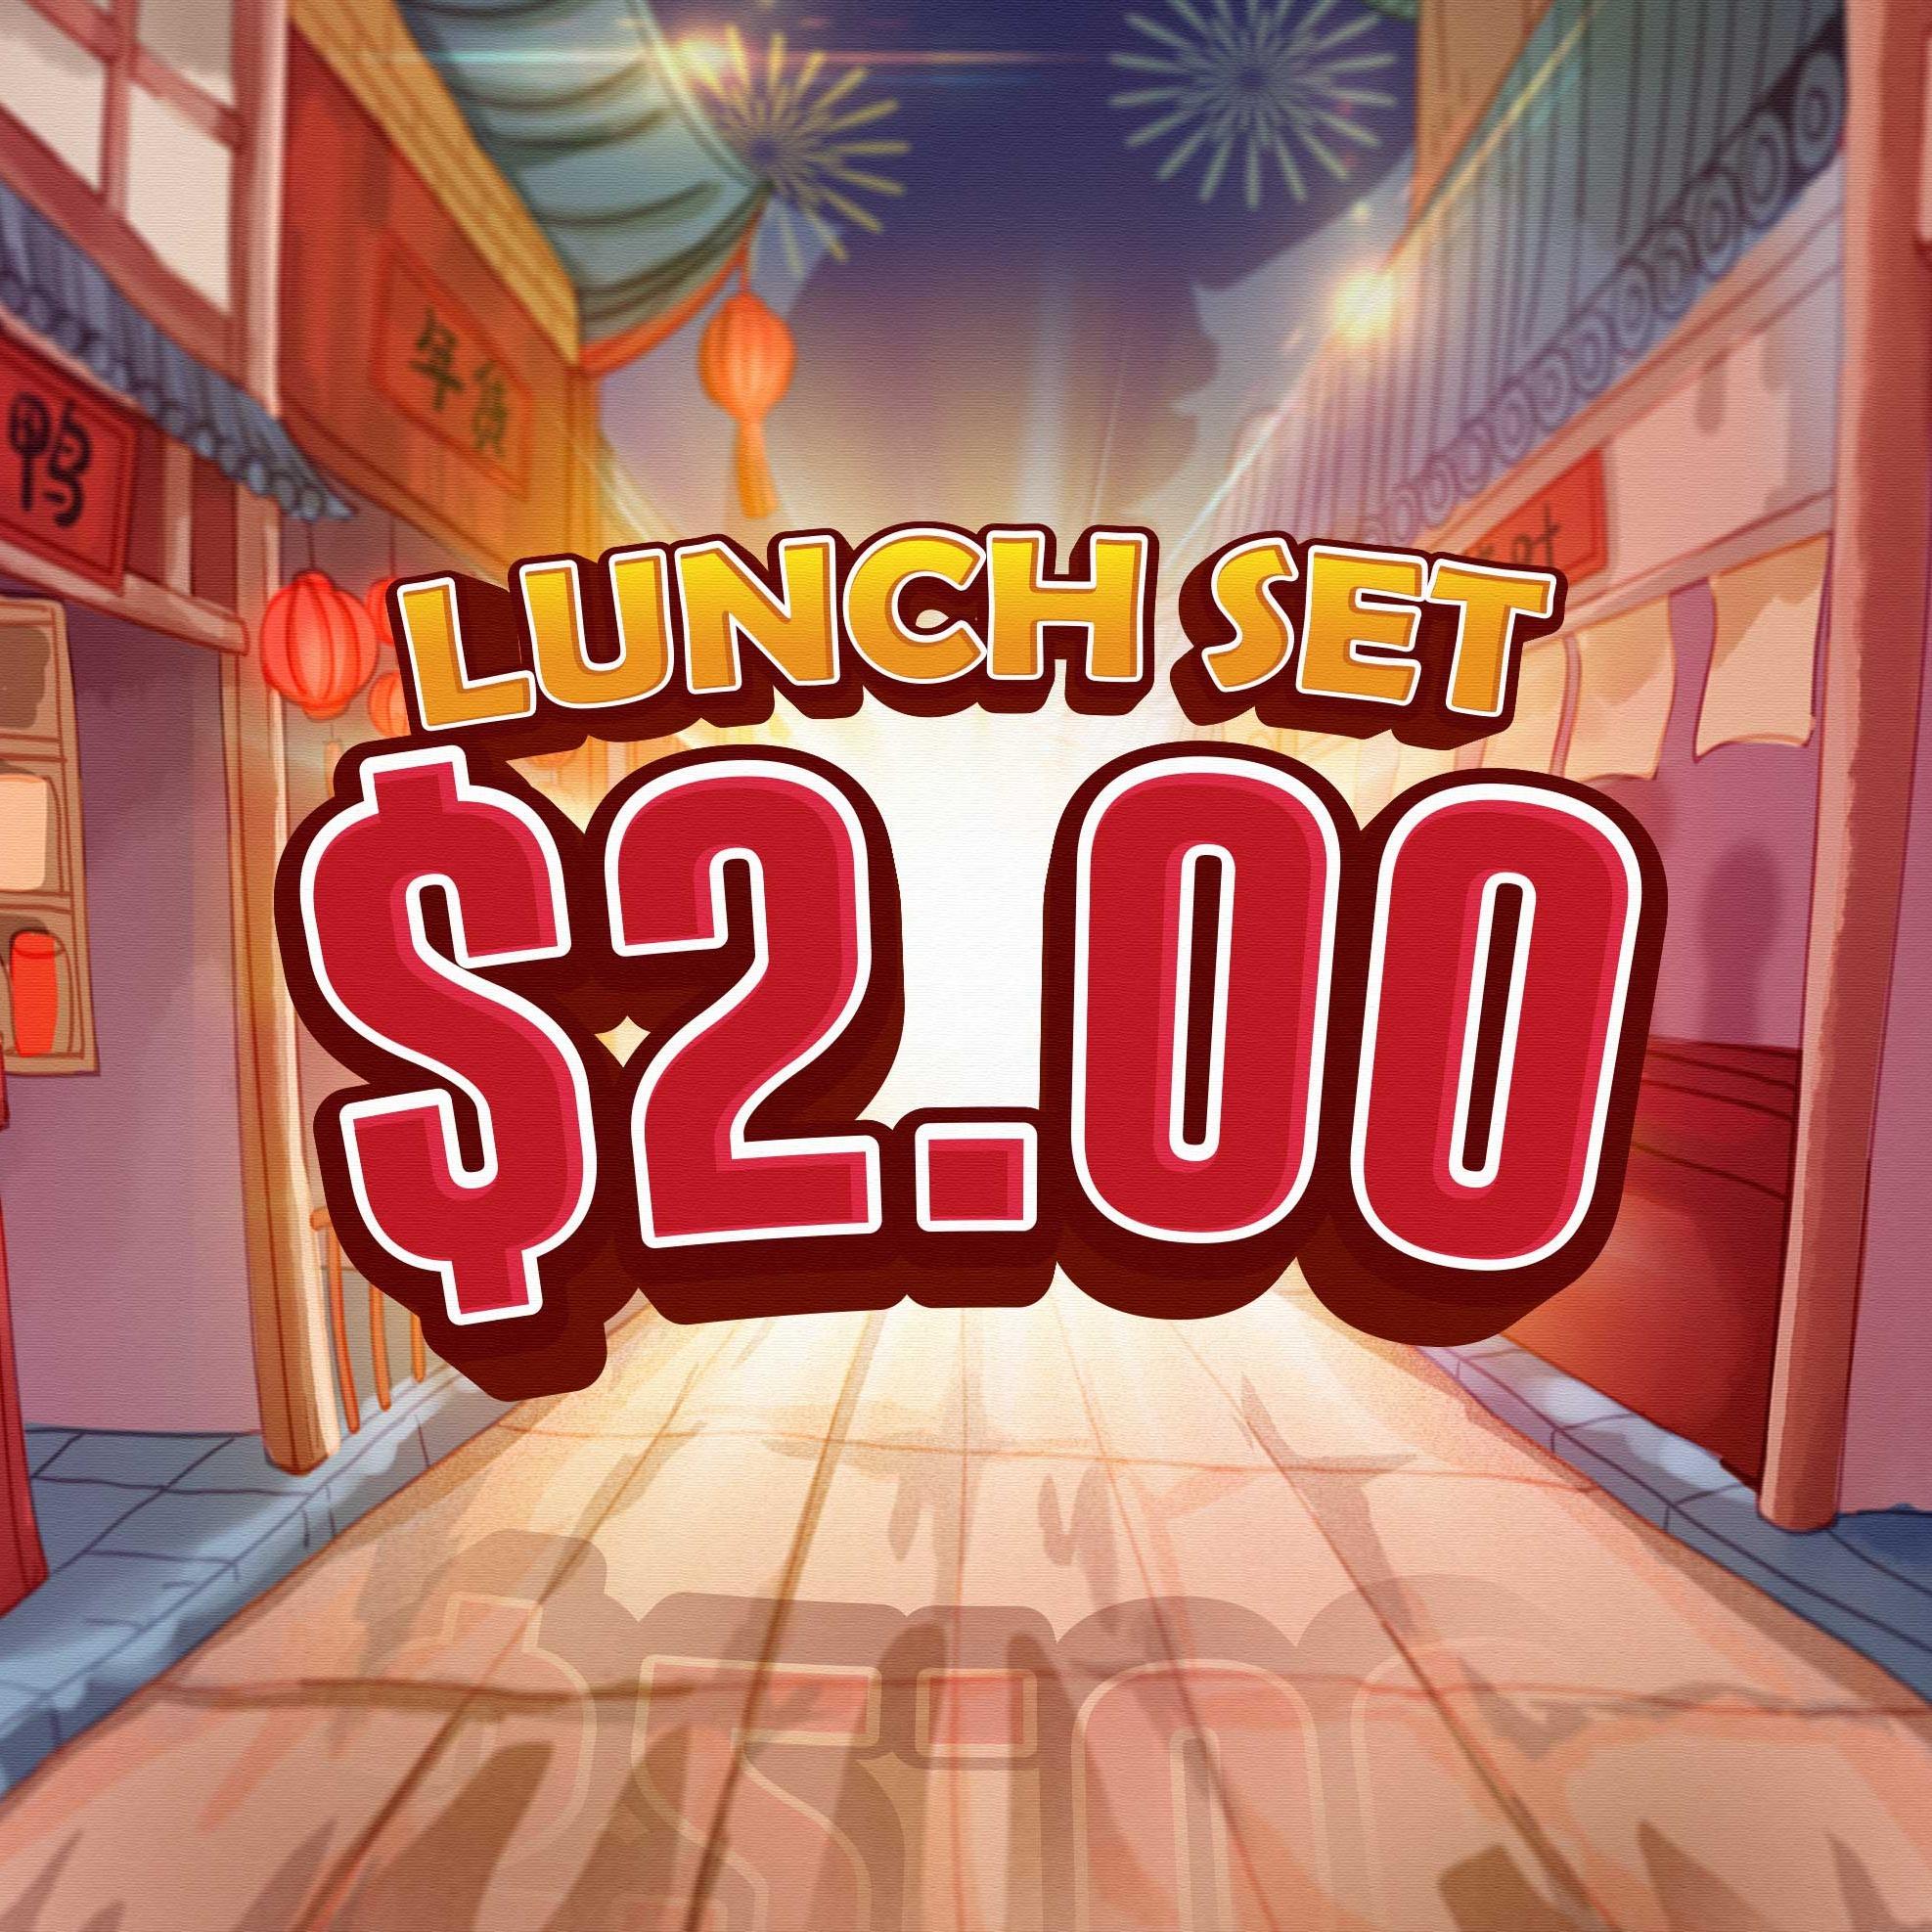 Lunch Set $2.00